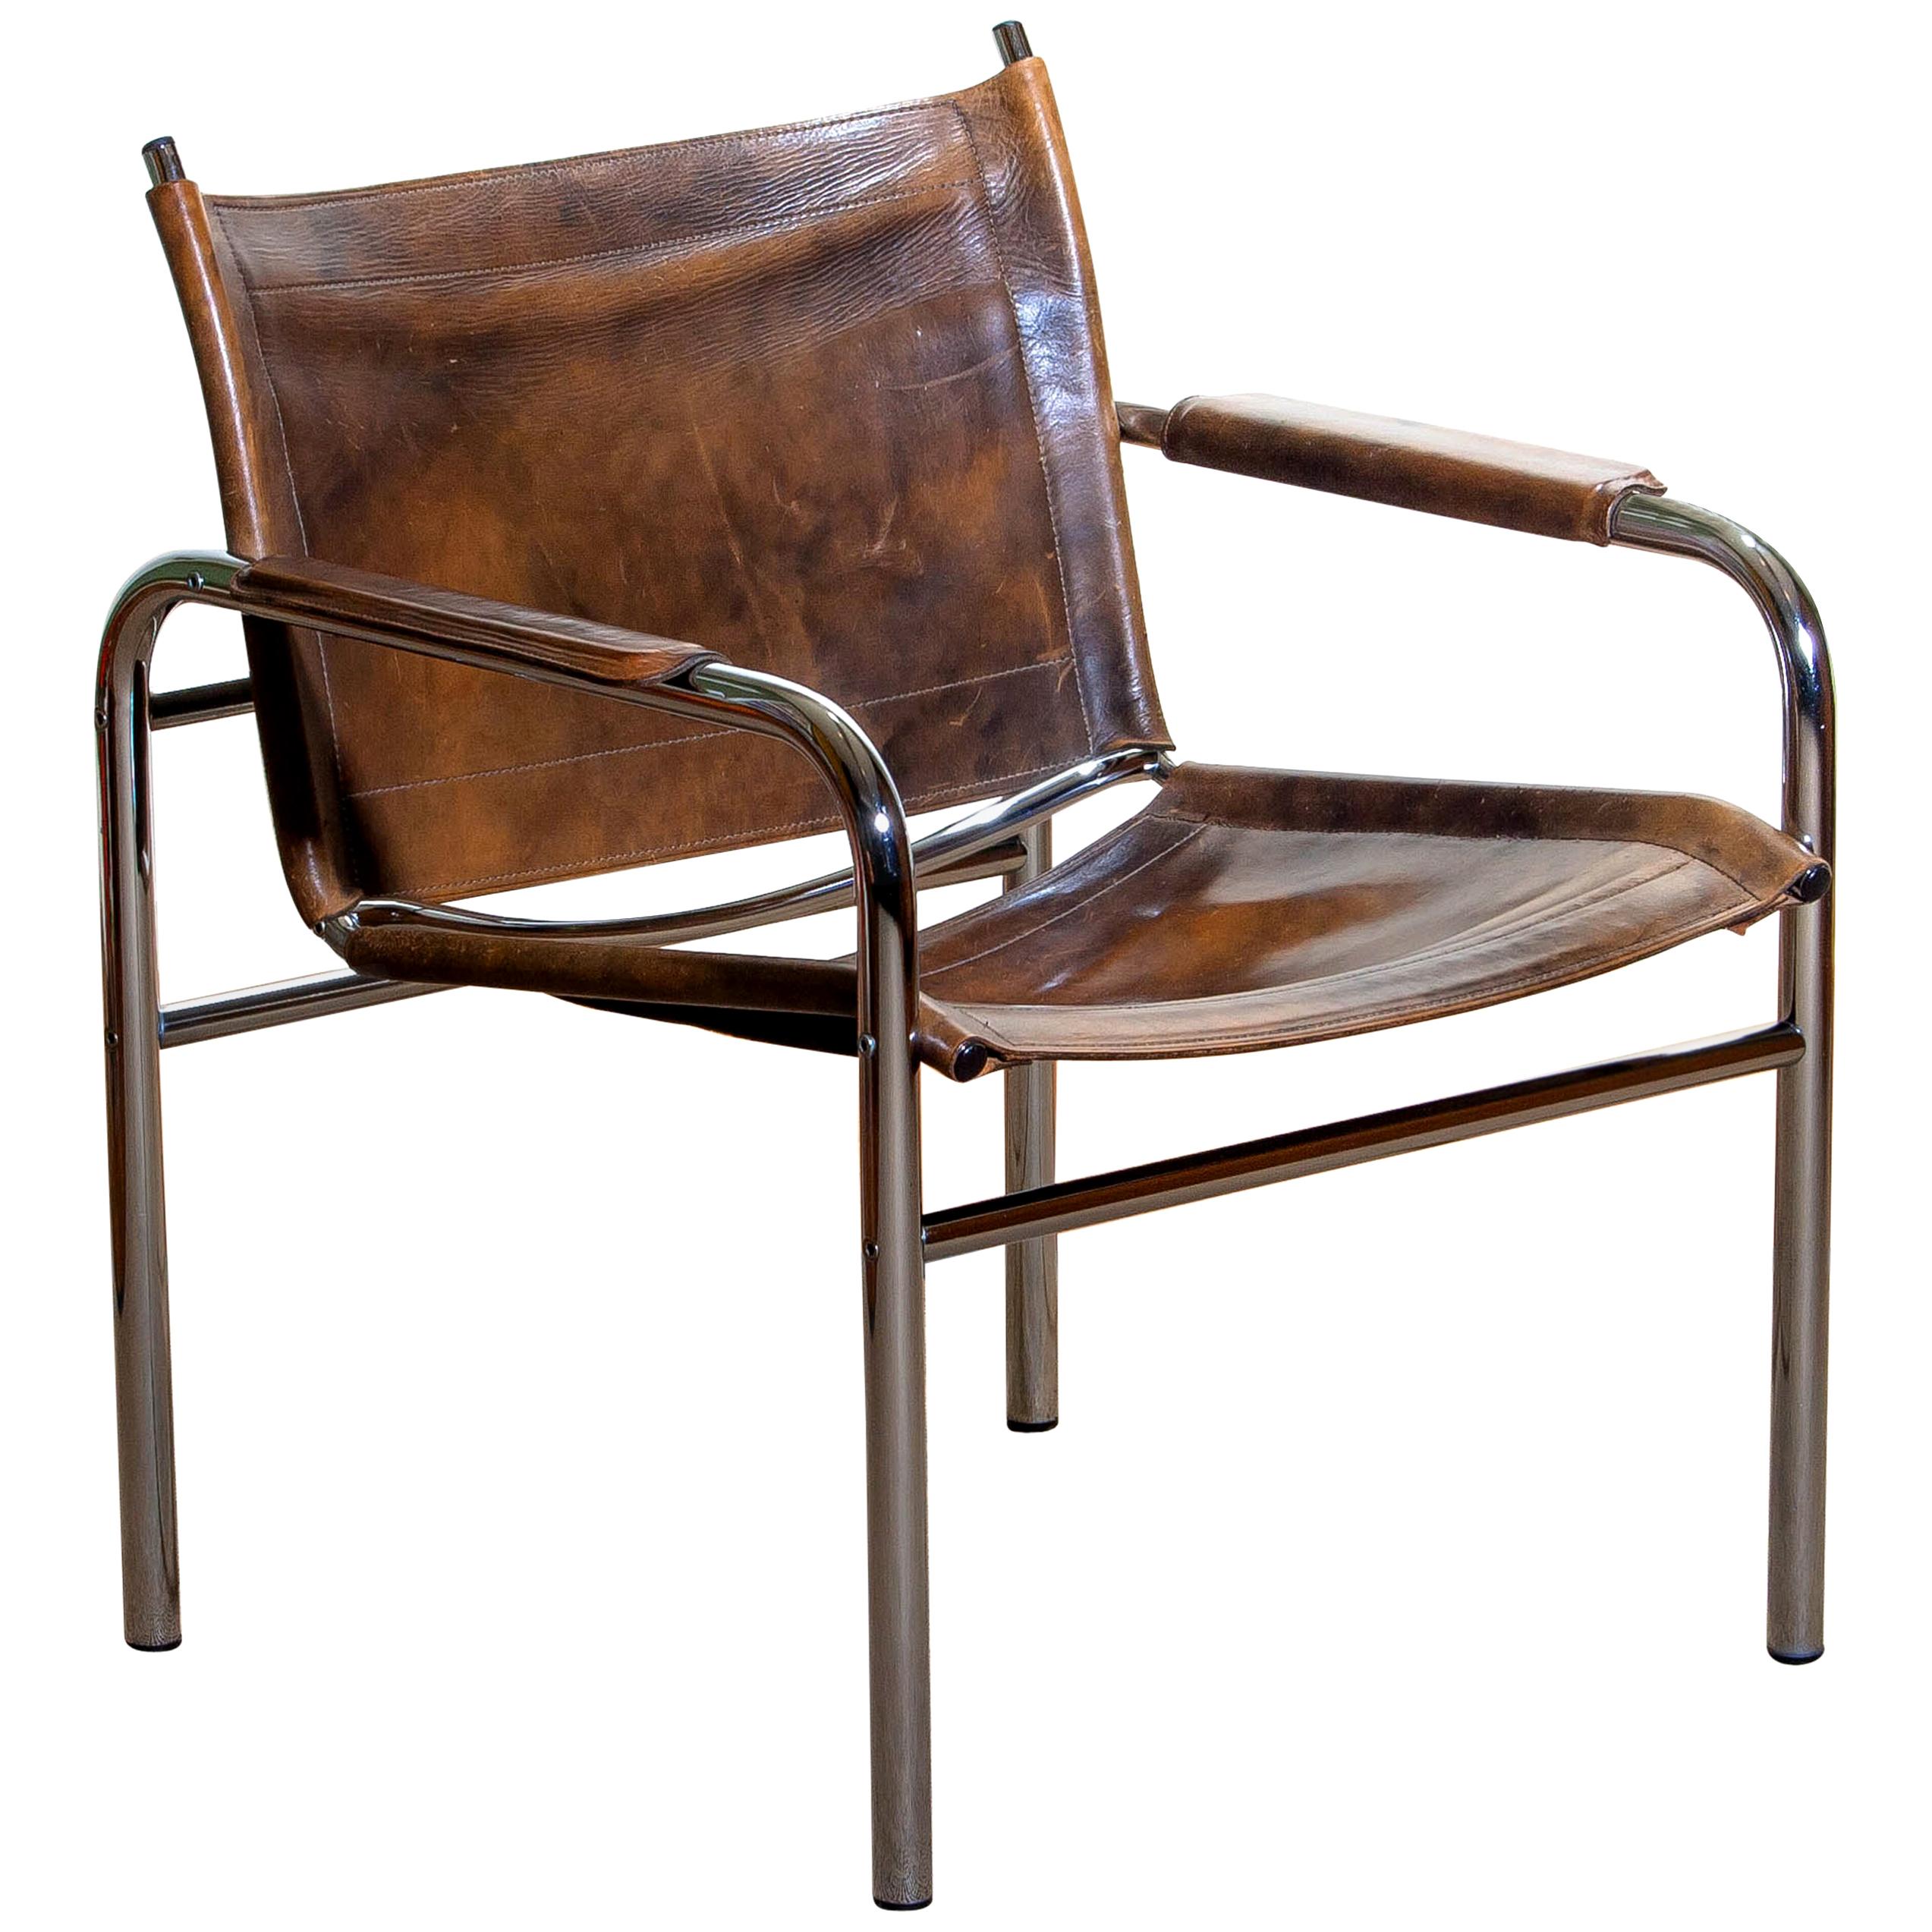 1980s Leather and Tubular Steel Armchair by Tord Björklund, Sweden